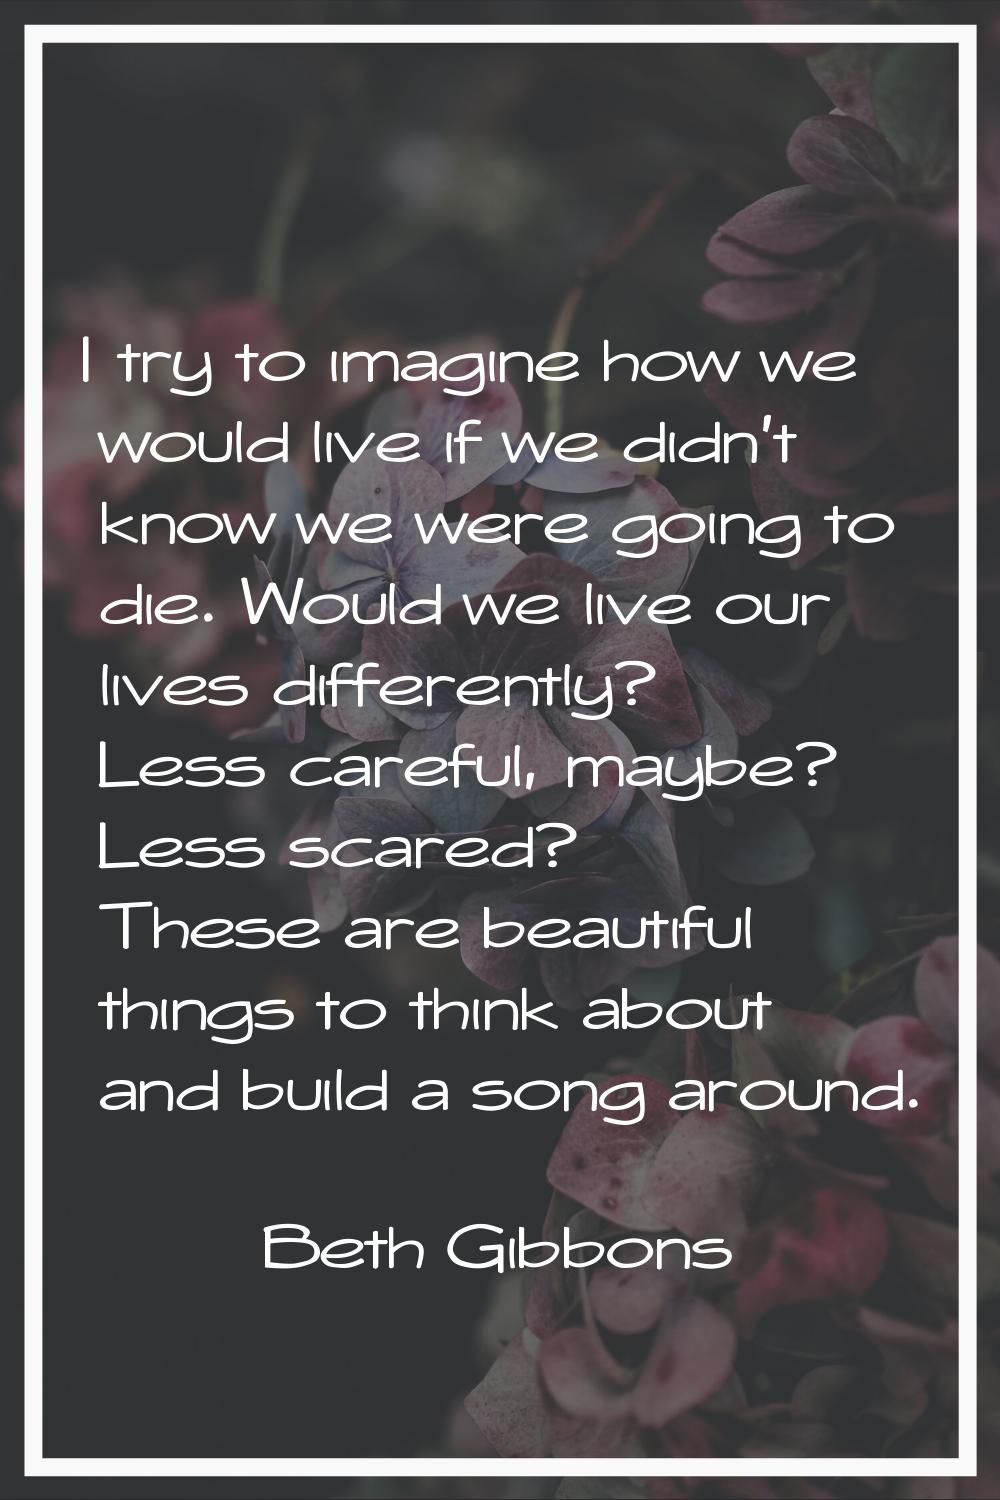 I try to imagine how we would live if we didn't know we were going to die. Would we live our lives 